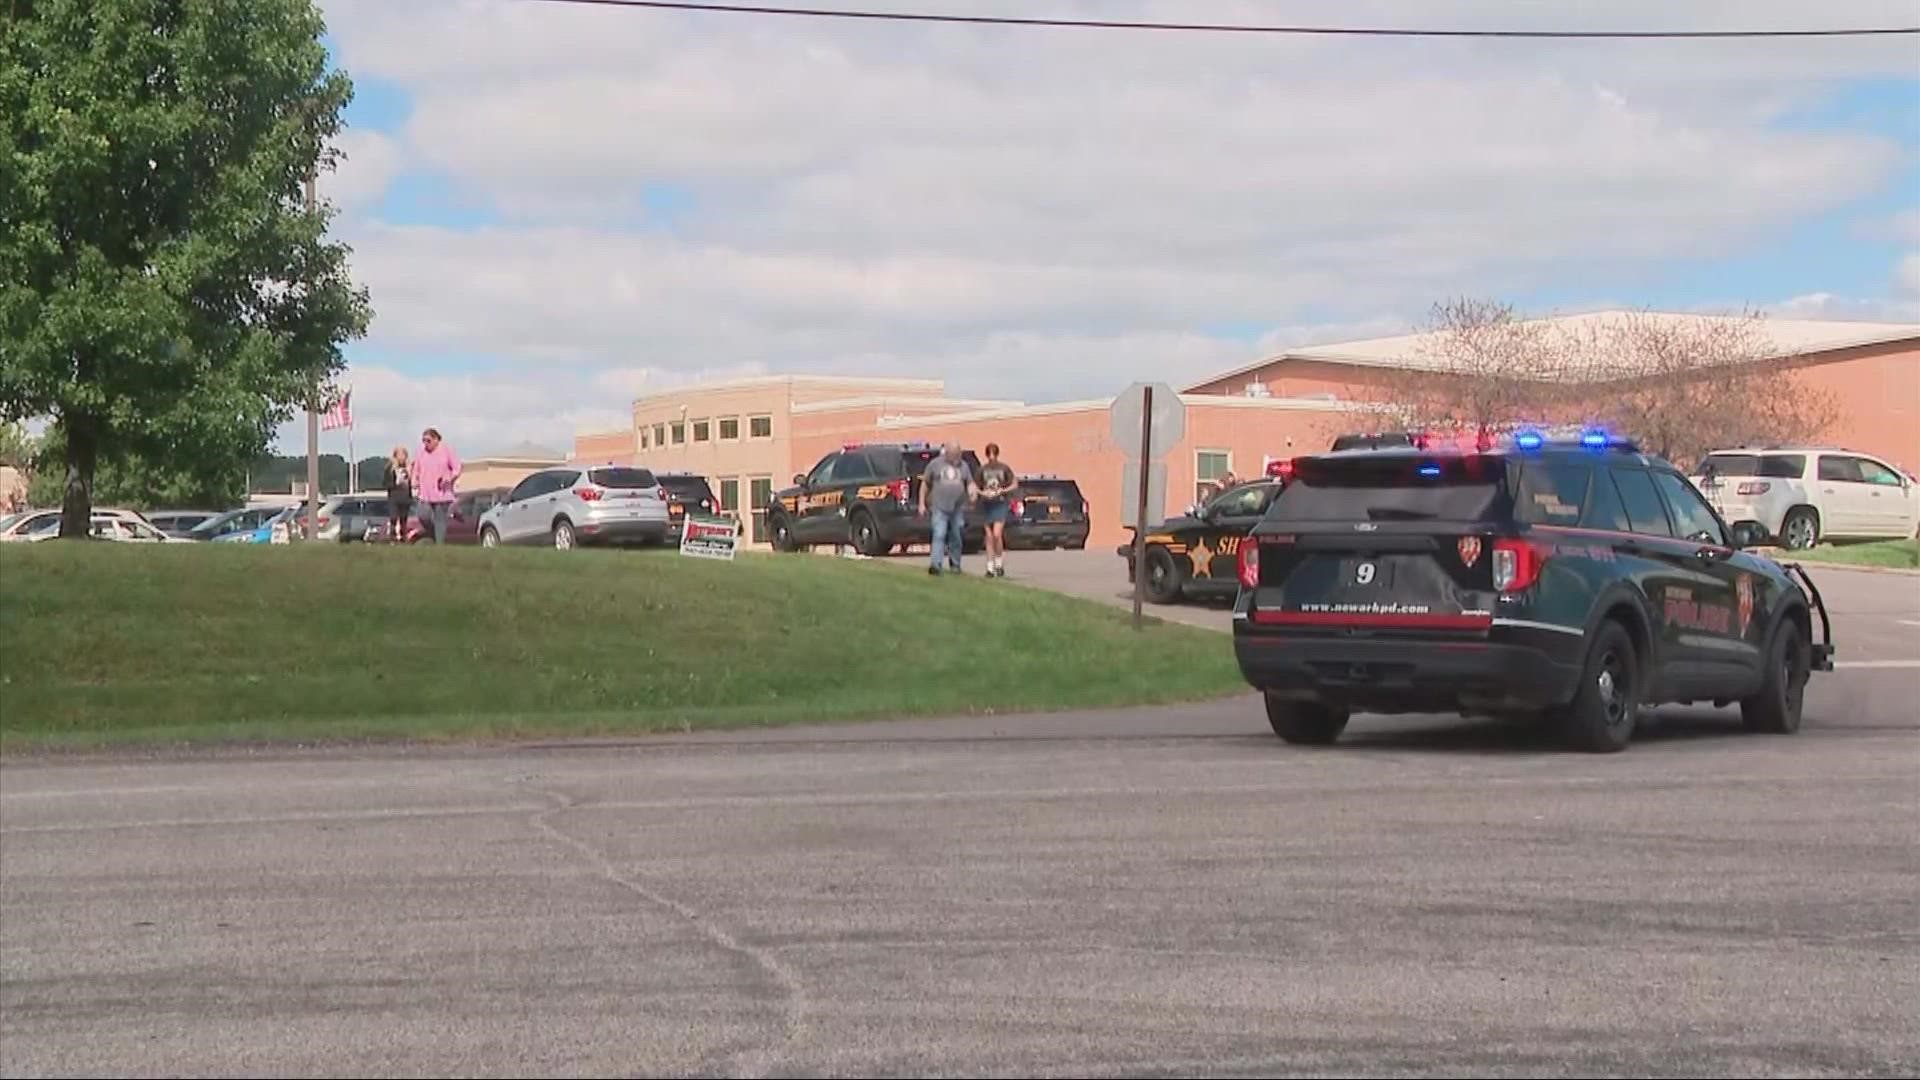 Schools across Ohio — including Akron and Cleveland — were hit with swatting hoaxes Friday.